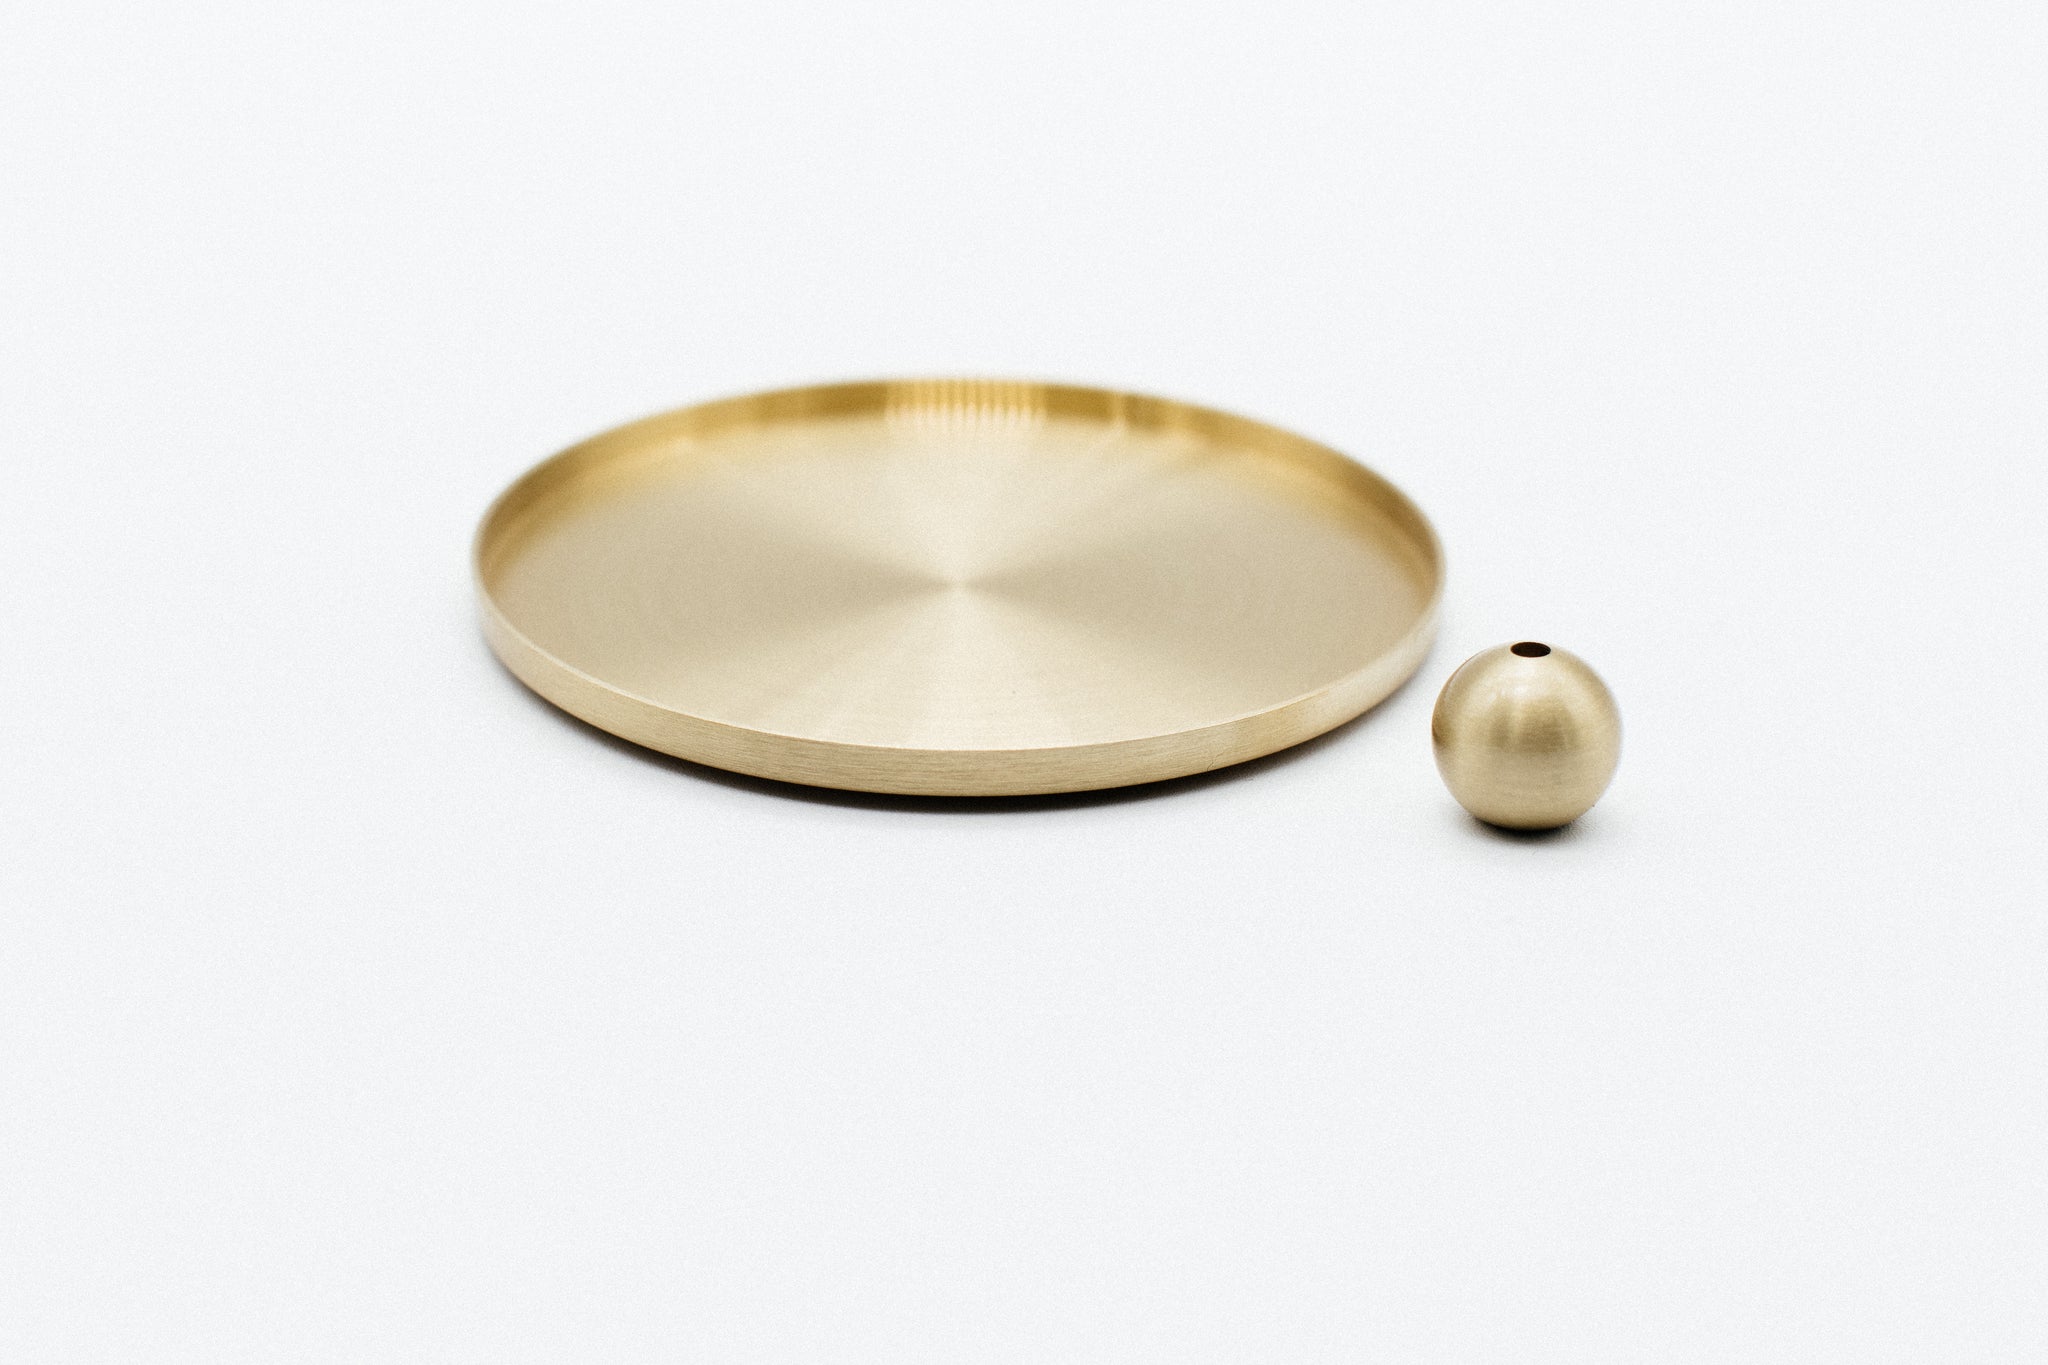 Brass Ball and Tray Incense Burner